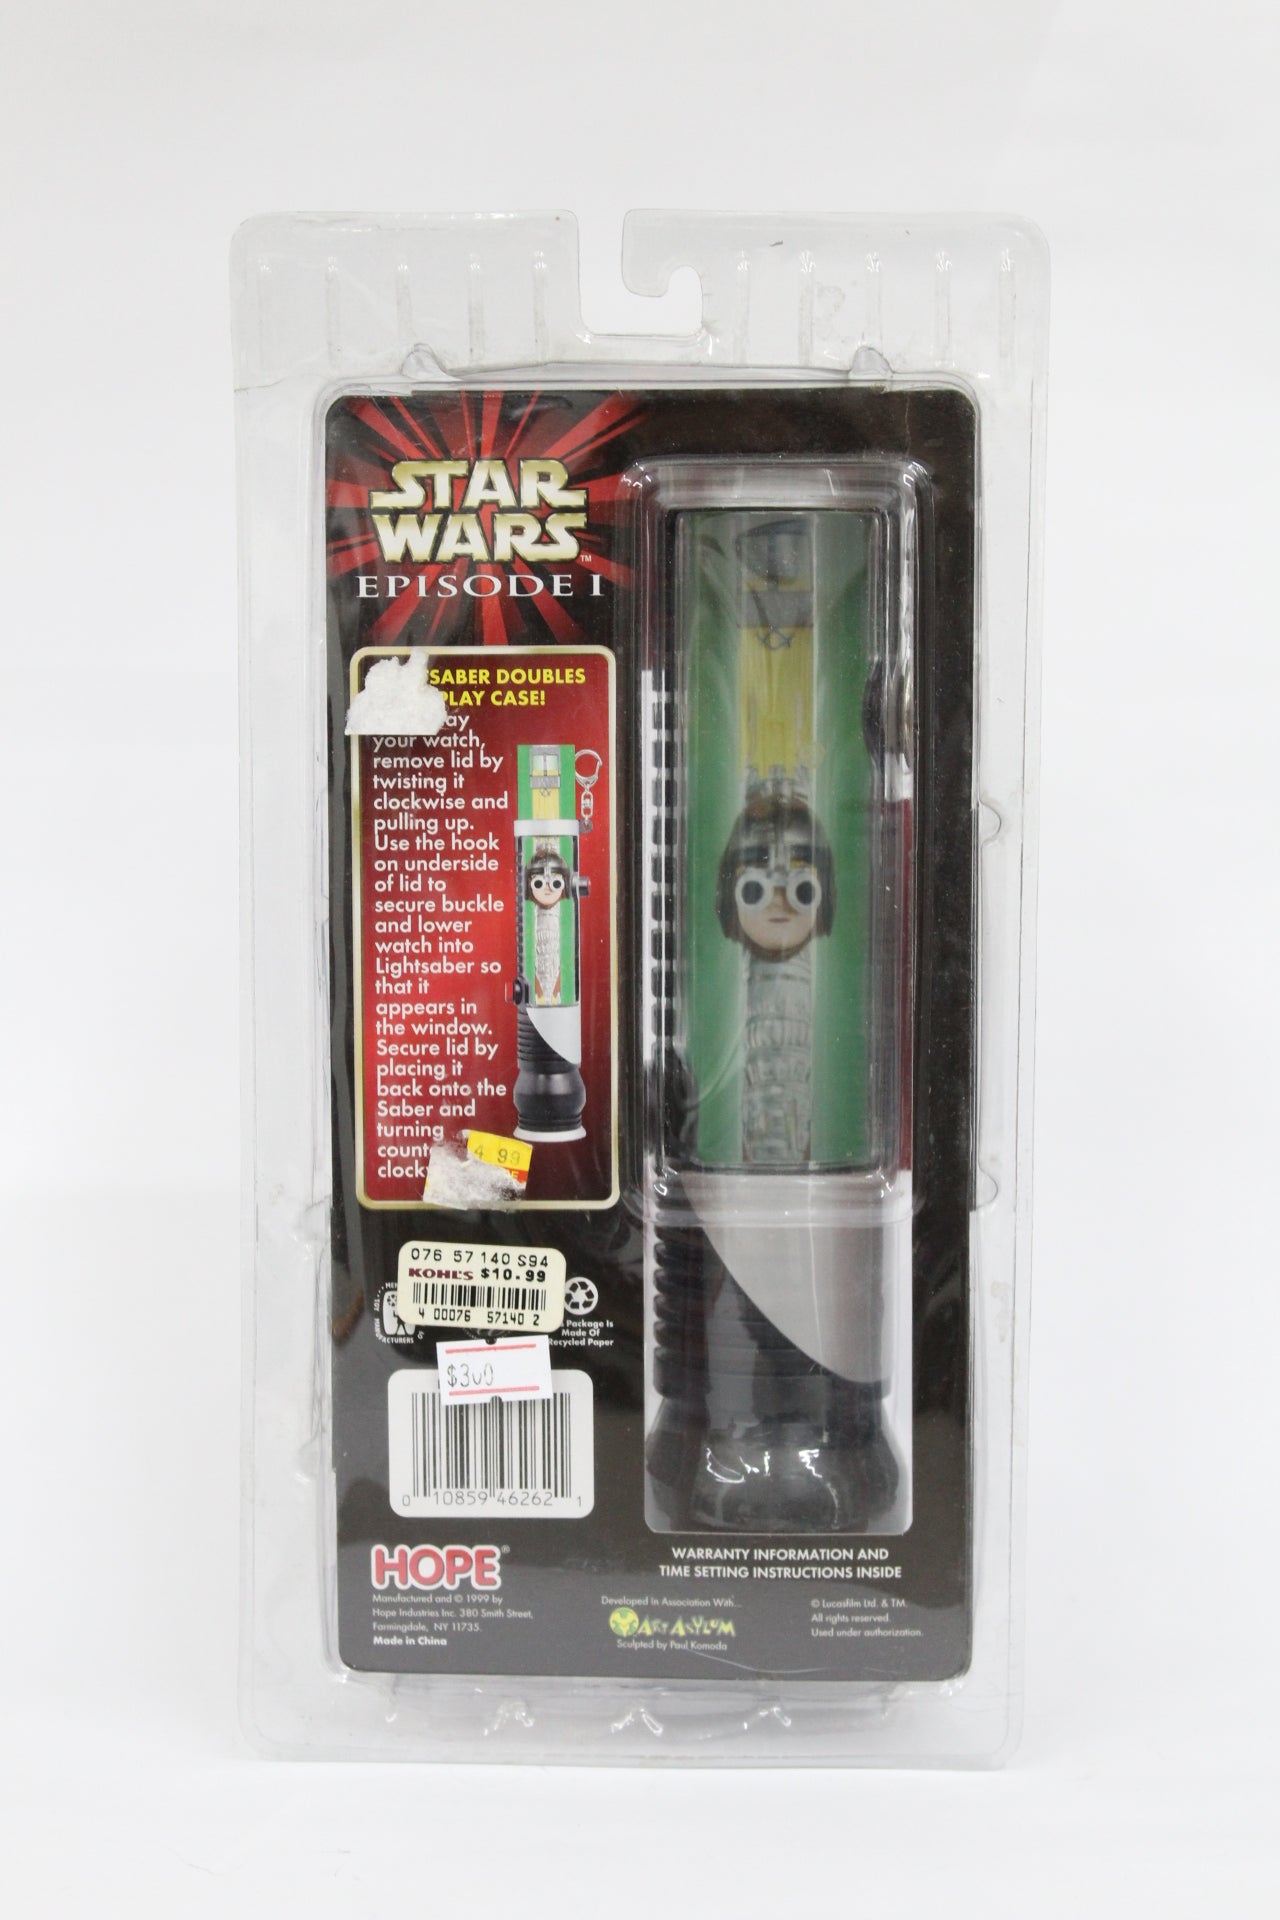 Collection Watch Qui-Gon Ligthsaber Star wars Episodio 1 Hope